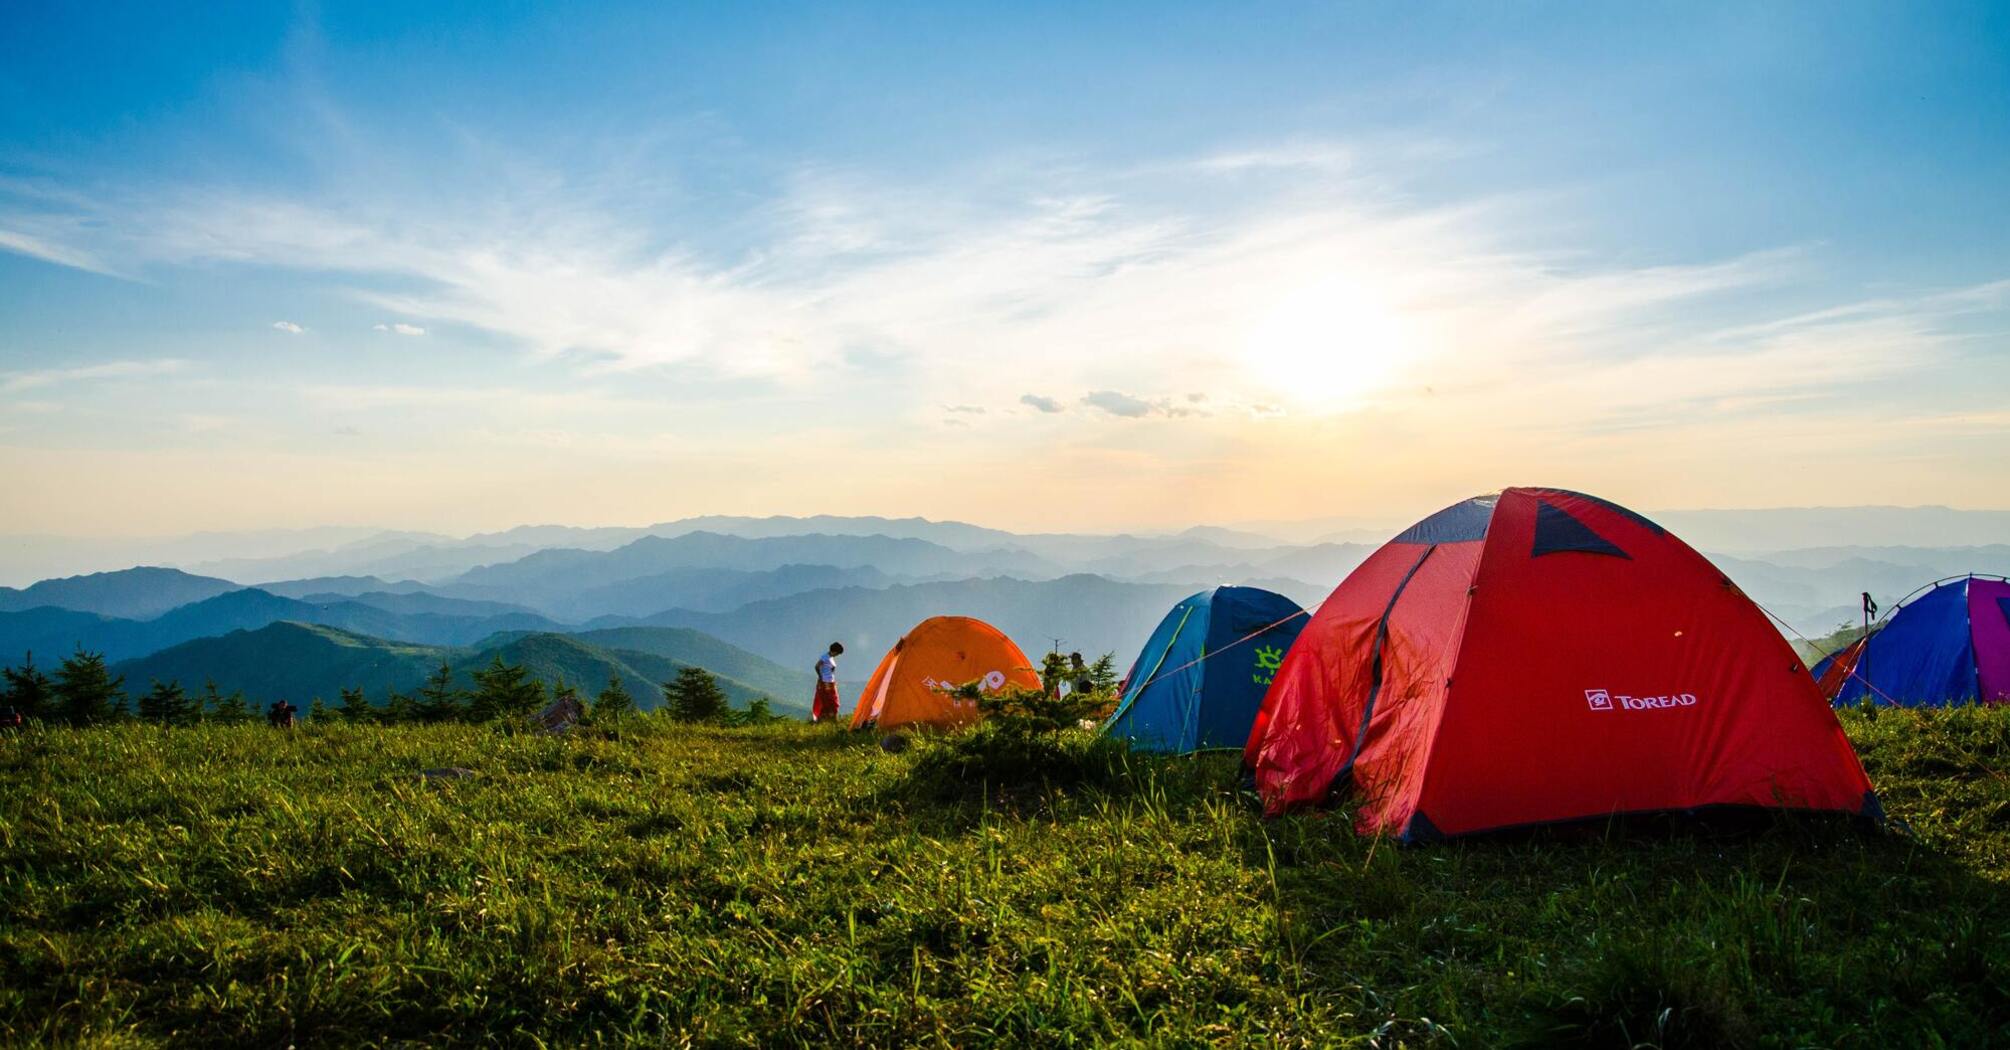 Camping near Pigeon Forge on top of a mountain with beautiful views and access to various facilities